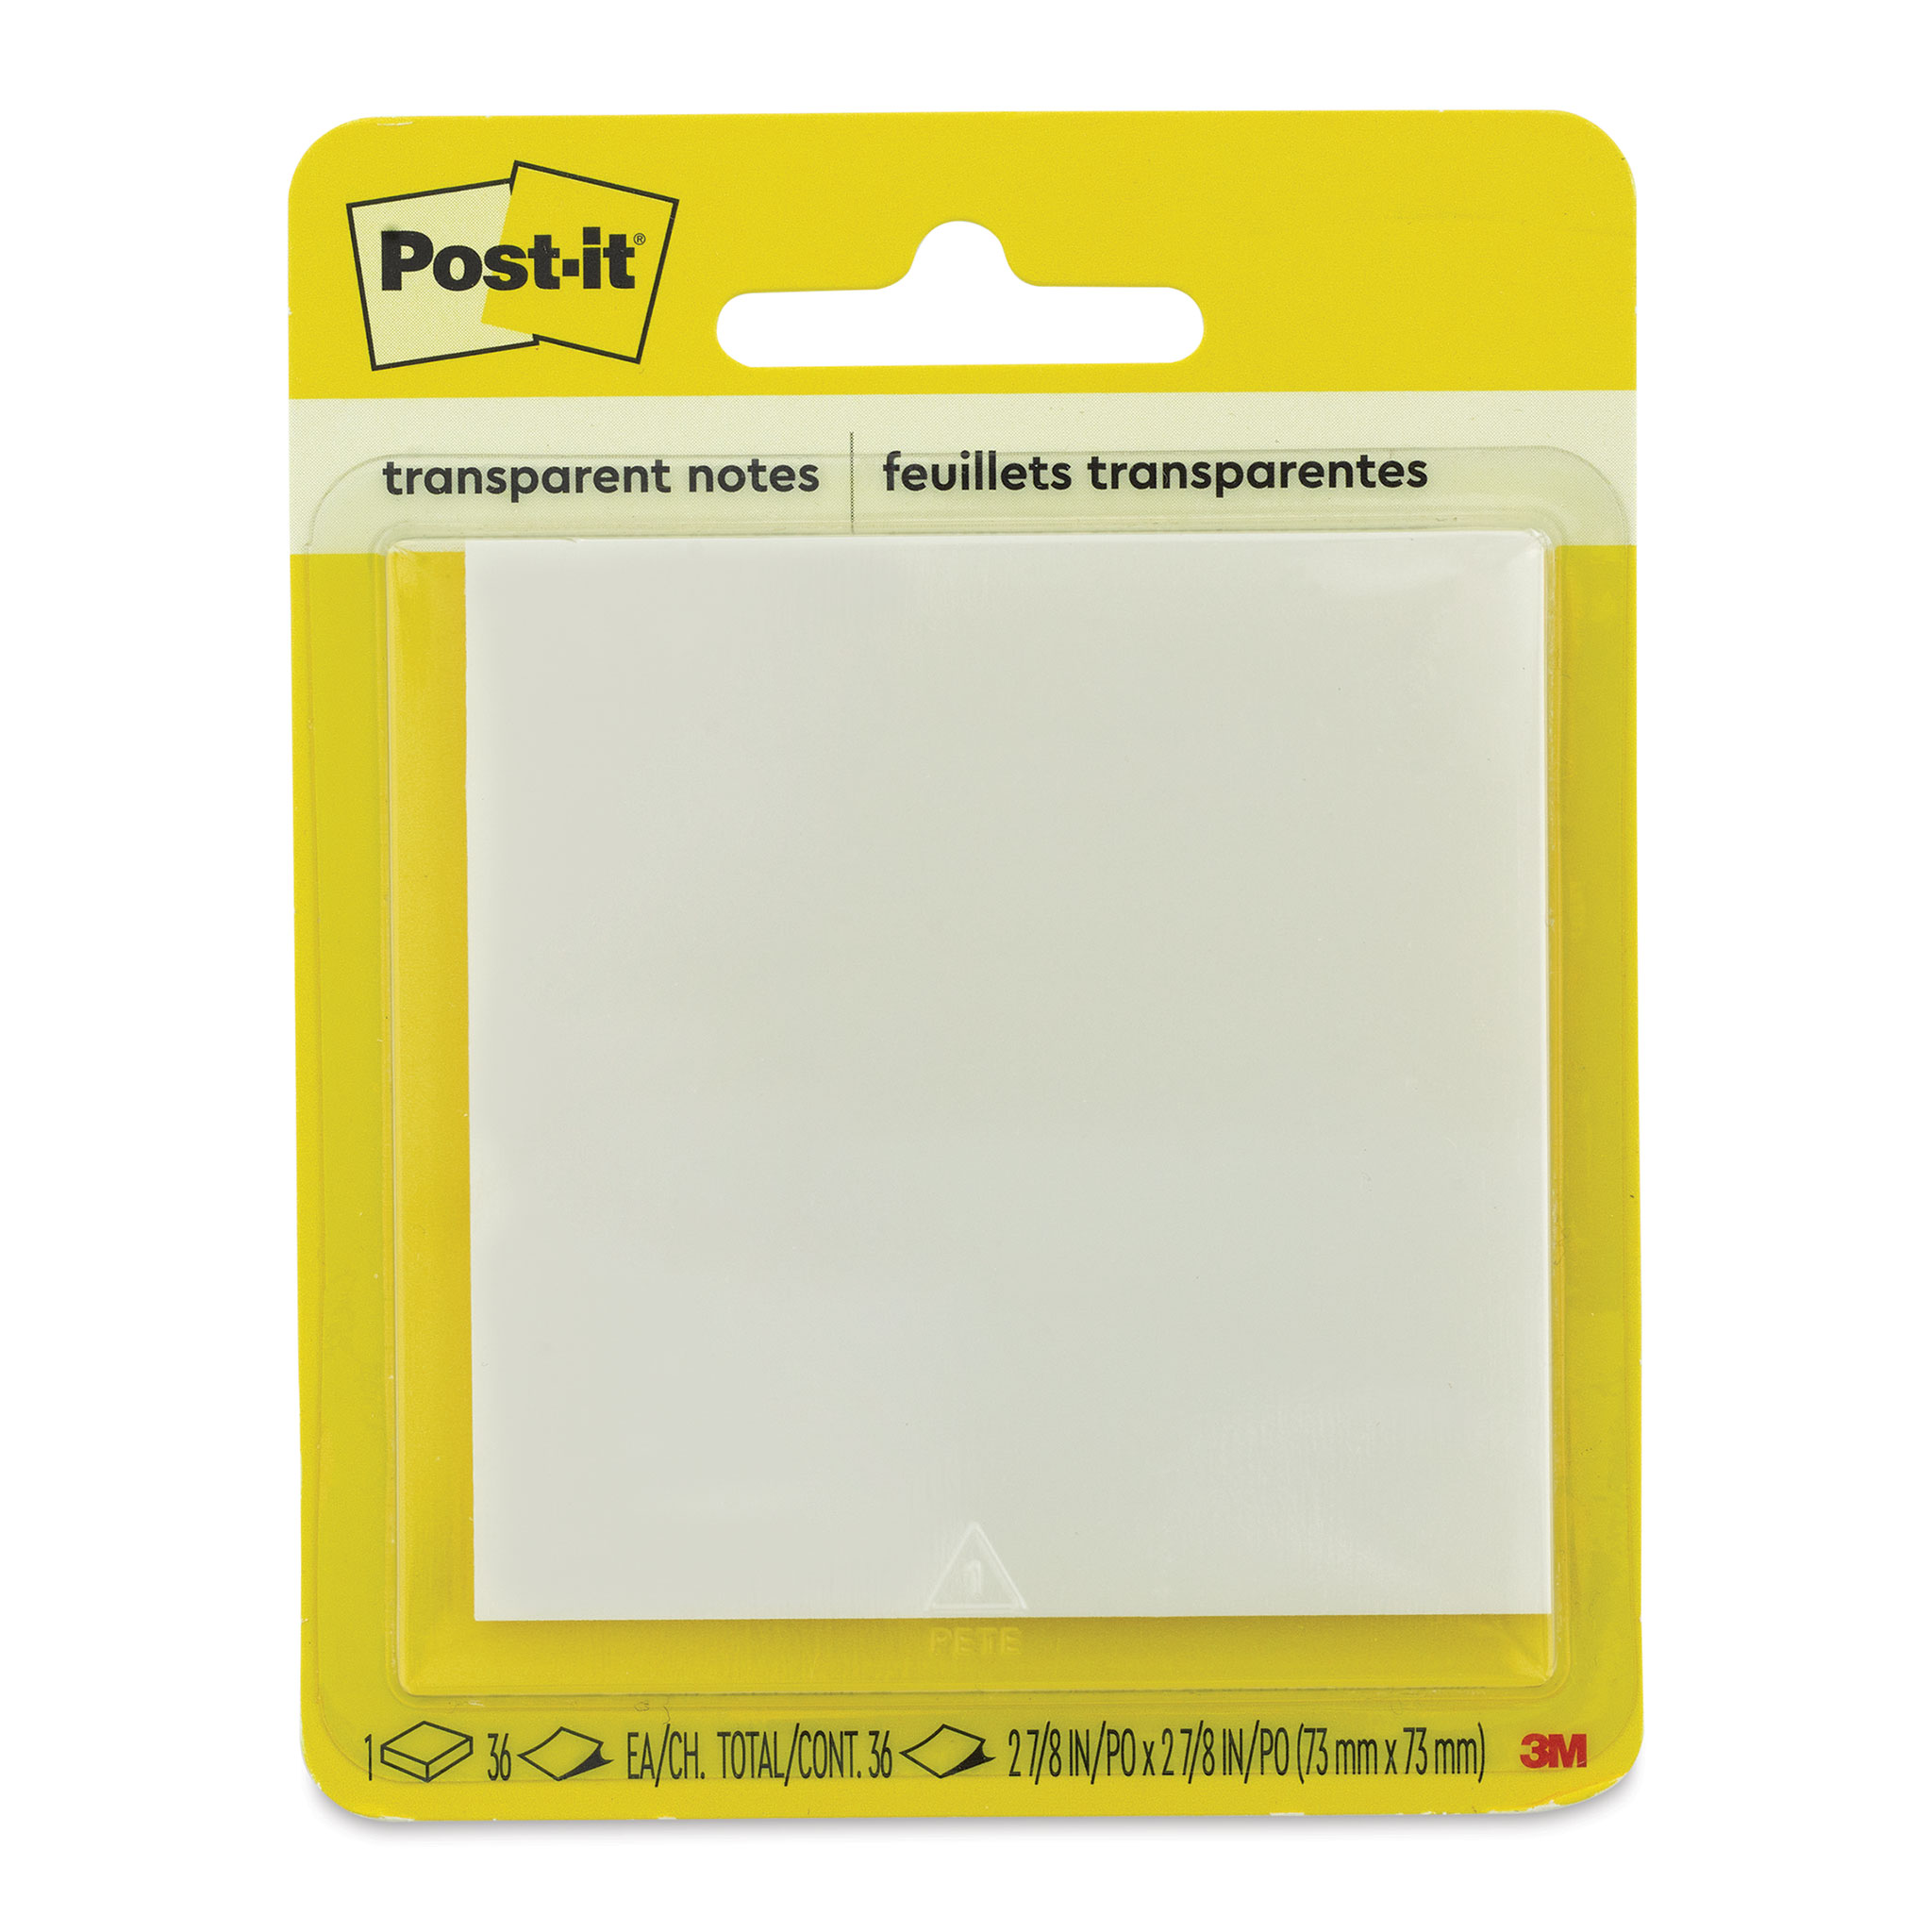  Post-it Transparent Notes, Clear Sticky Notes to